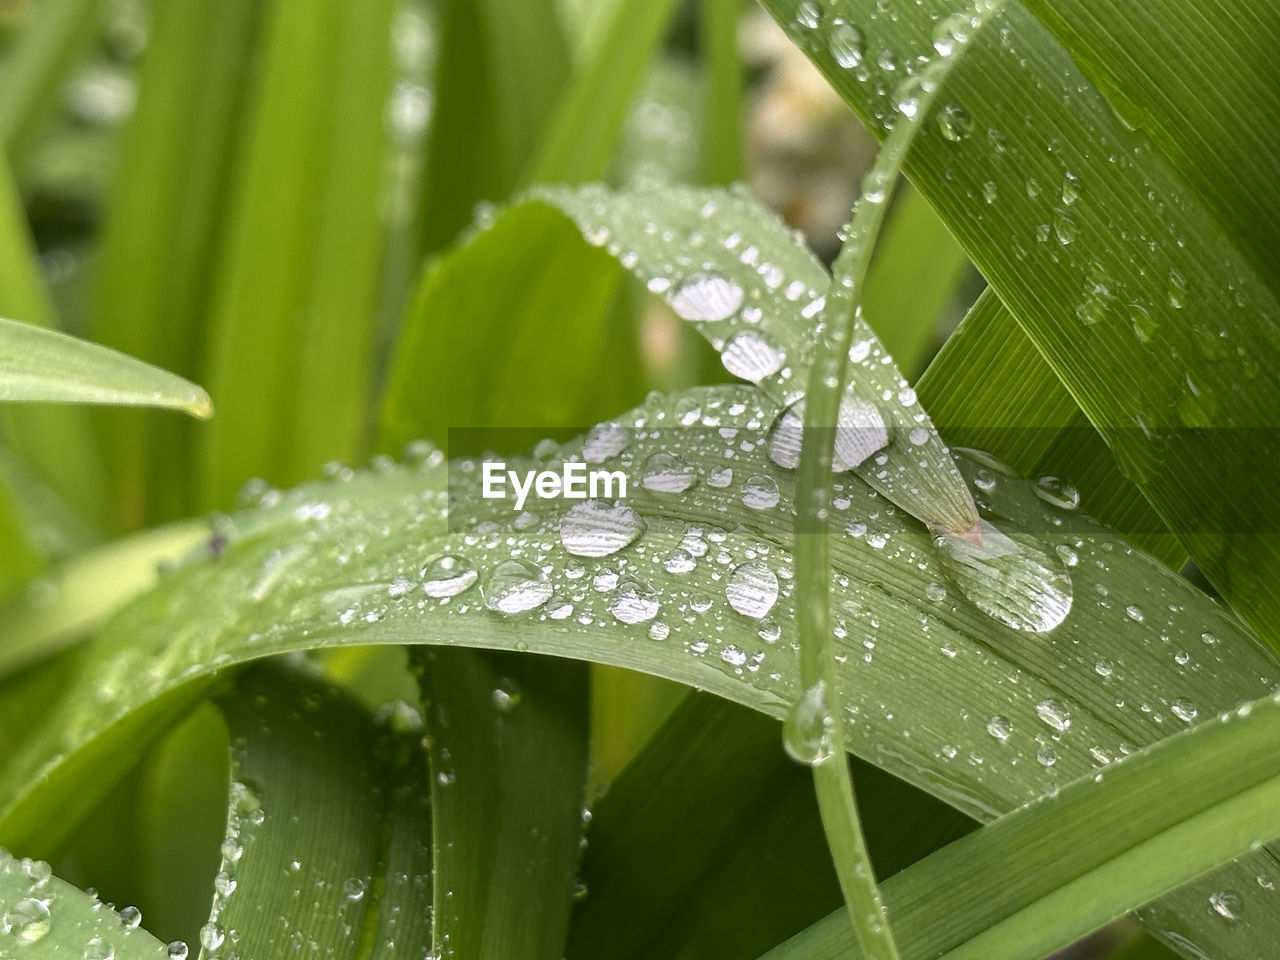 water, leaf, drop, plant part, wet, plant, green, nature, dew, moisture, grass, close-up, beauty in nature, rain, plant stem, growth, macro photography, no people, freshness, flower, blade of grass, outdoors, environment, tropical climate, day, fragility, focus on foreground, raindrop, lawn